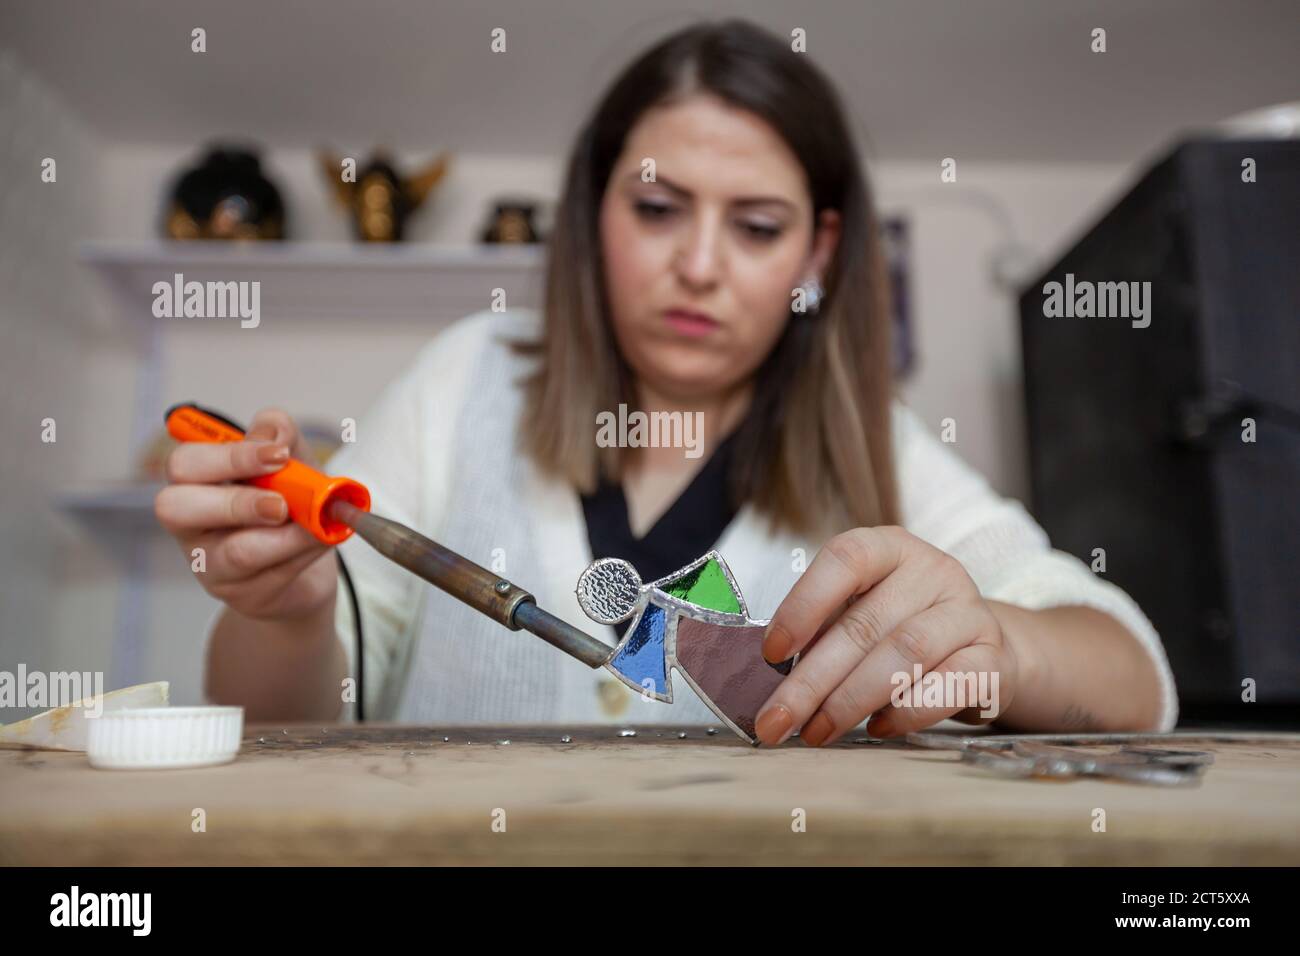 Bethlehem, West Bank city of Bethlehem. 21st Sep, 2020. Palestinian artist Dalia Murra, 27, works on a stained glass artwork at her workshop in the West Bank city of Bethlehem, Sept. 21, 2020. Credit: Luay Sababa/Xinhua/Alamy Live News Stock Photo